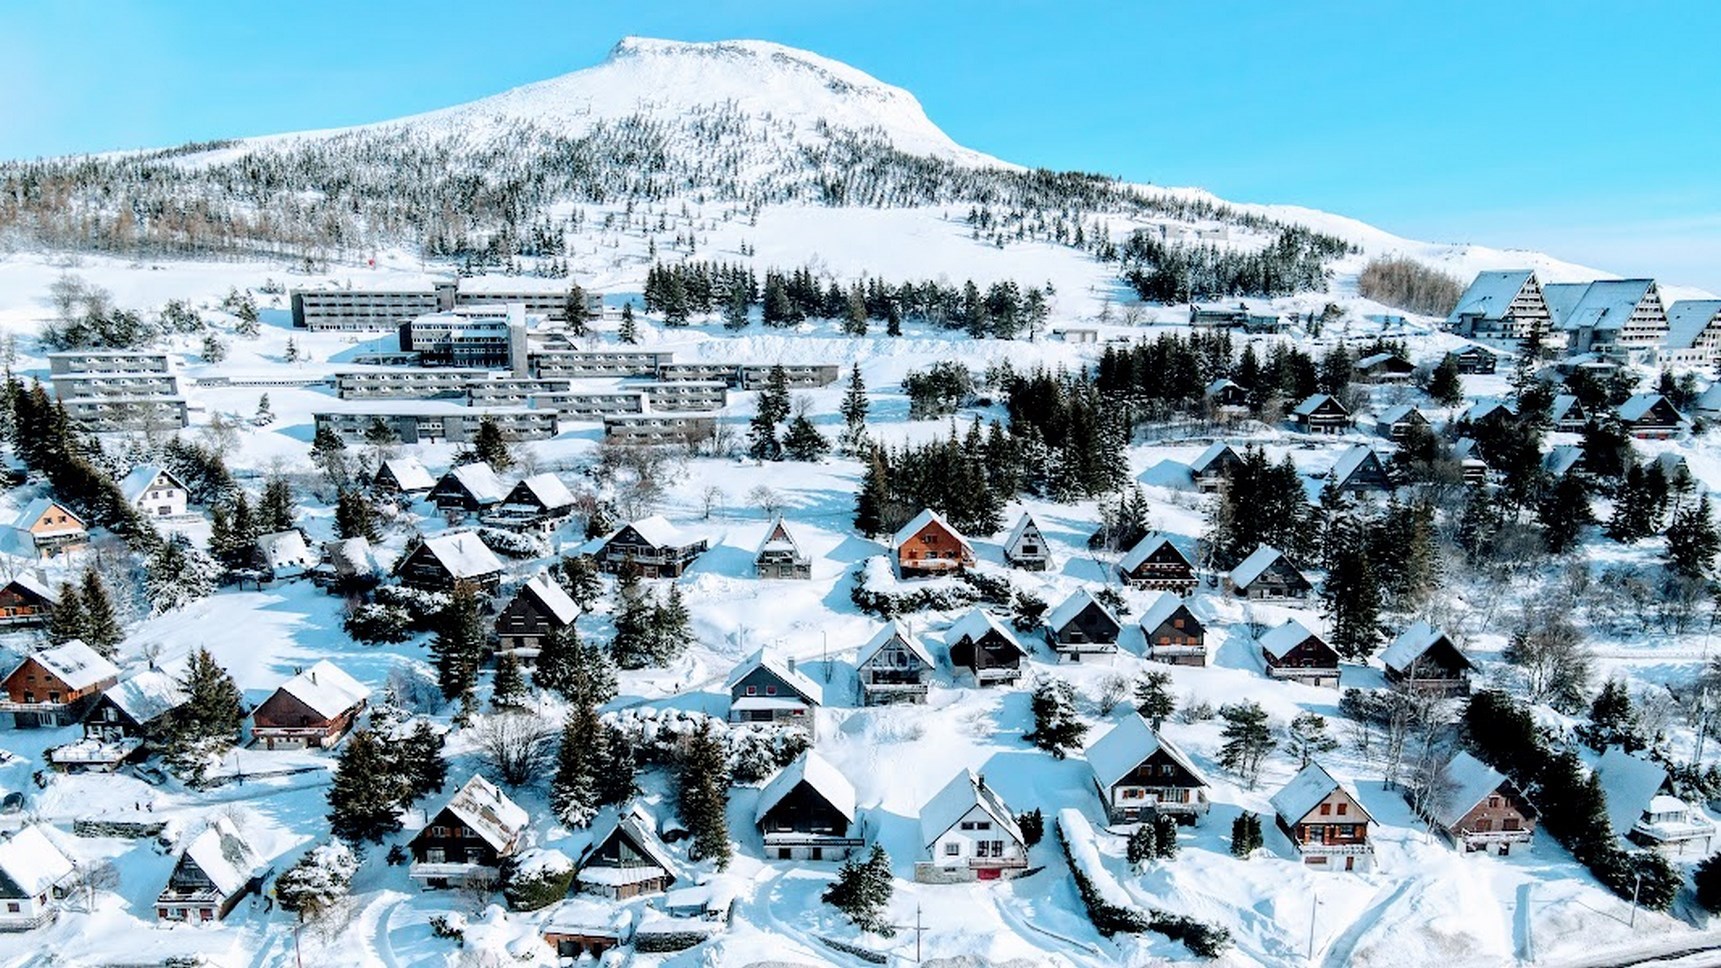 Wide panorama of the chalet village of the resort of Super Besse during the summer season